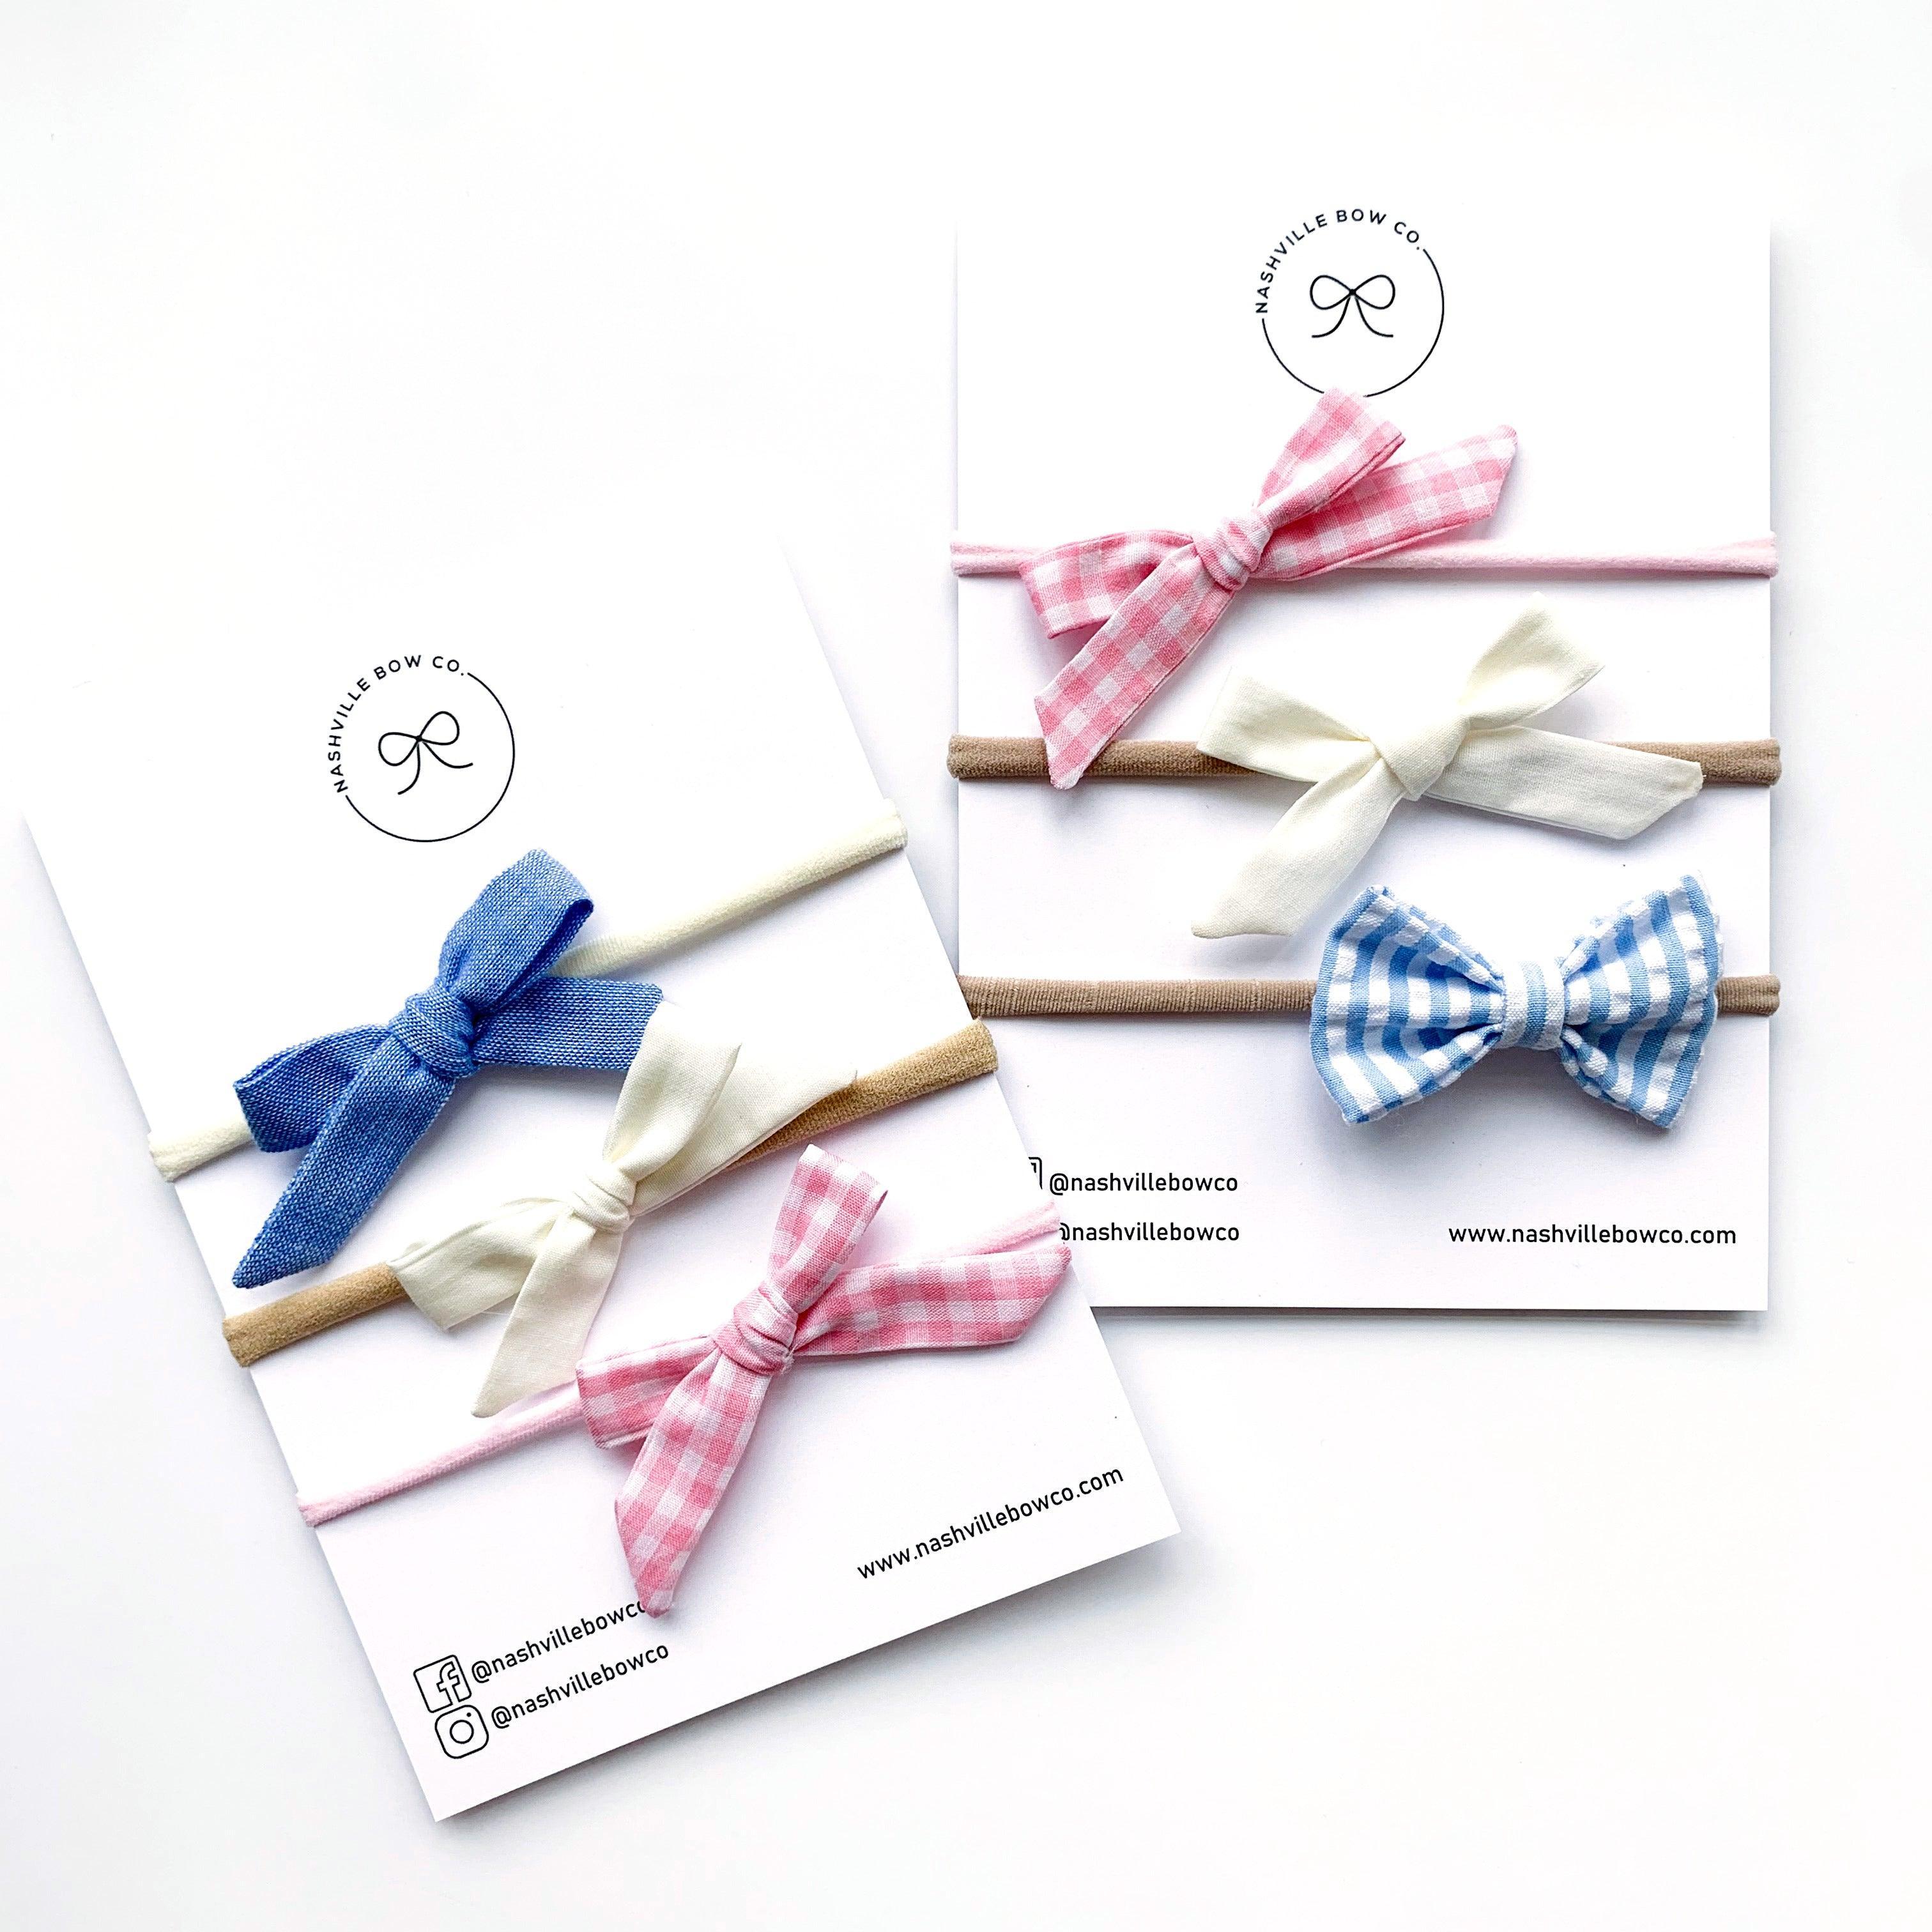 New Girl Bow - Navy Linen | Nashville Bow Co. - Classic Hair Bows, Bow Ties, Basket Bows, Pacifier Clips, Wreath Sashes, Swaddle Bows. Classic Southern Charm.